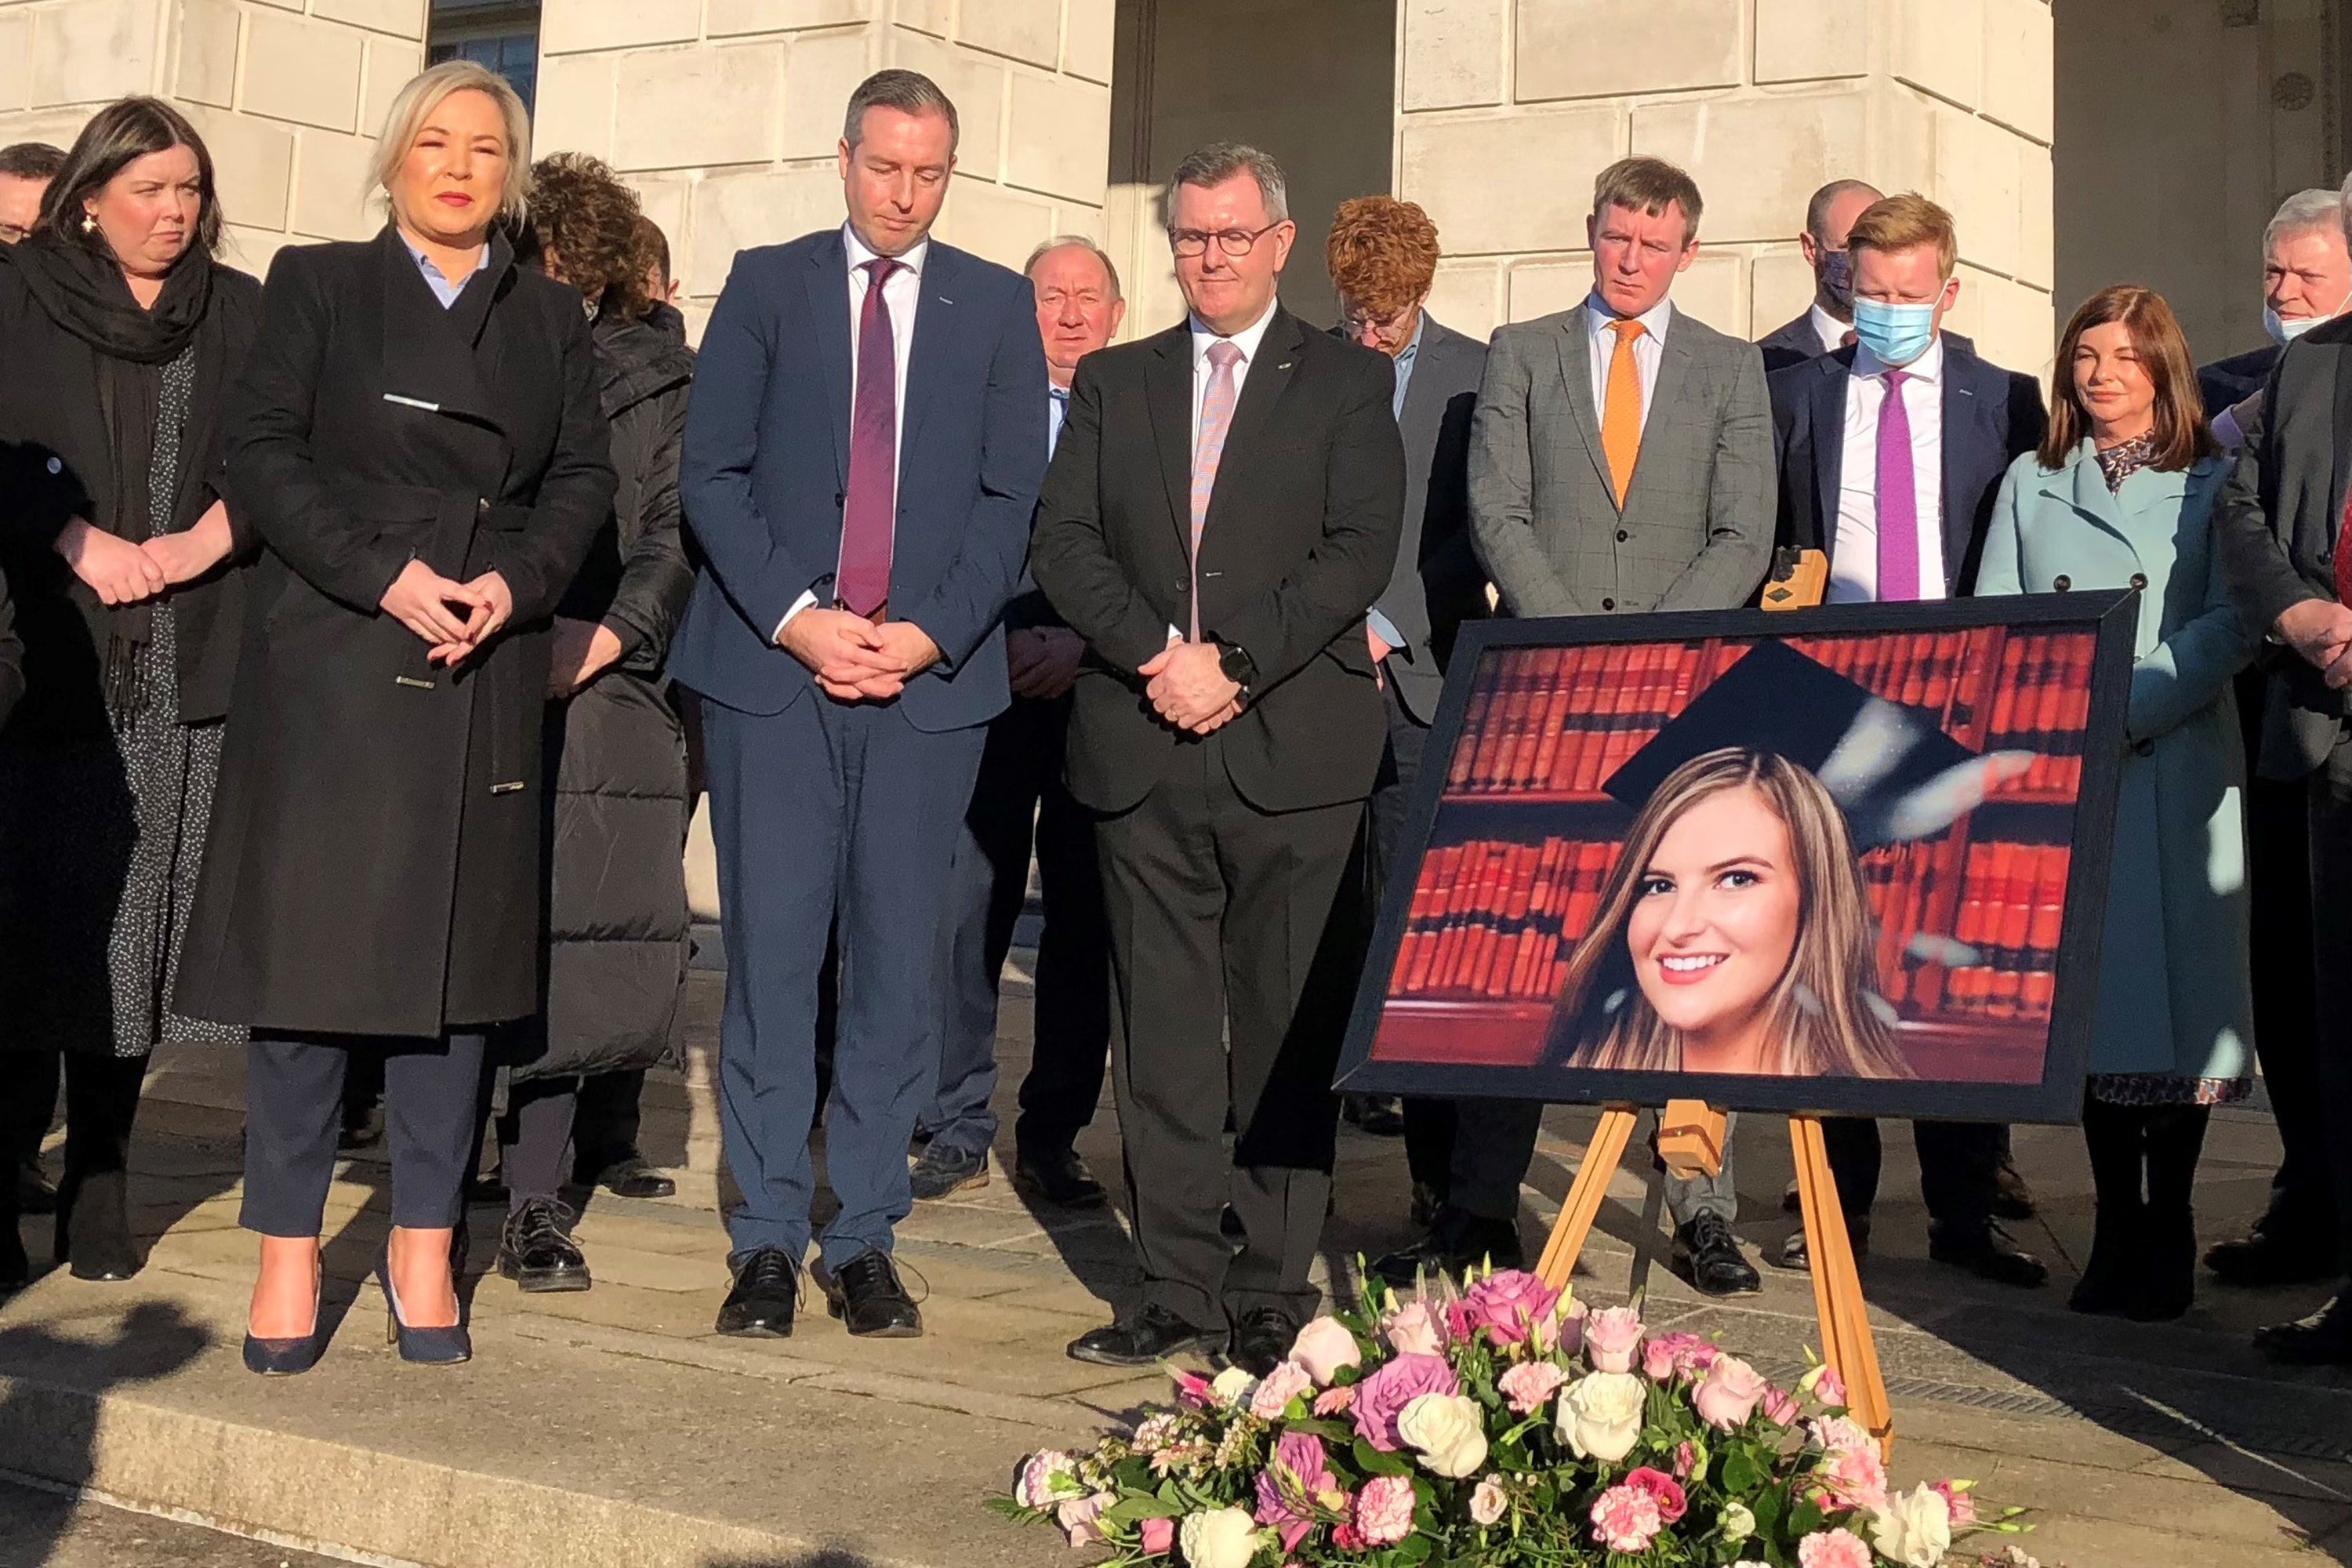 Deputy First Minister Michelle ONeill, First Minister Paul Givan and DUP leader Sir Jeffrey Donaldson take part in a silent vigil on the steps of Parliament Buildings, Stormont, for Ashling Murphy, who was found dead after going for a run in Co Offaly (David Young/PA)